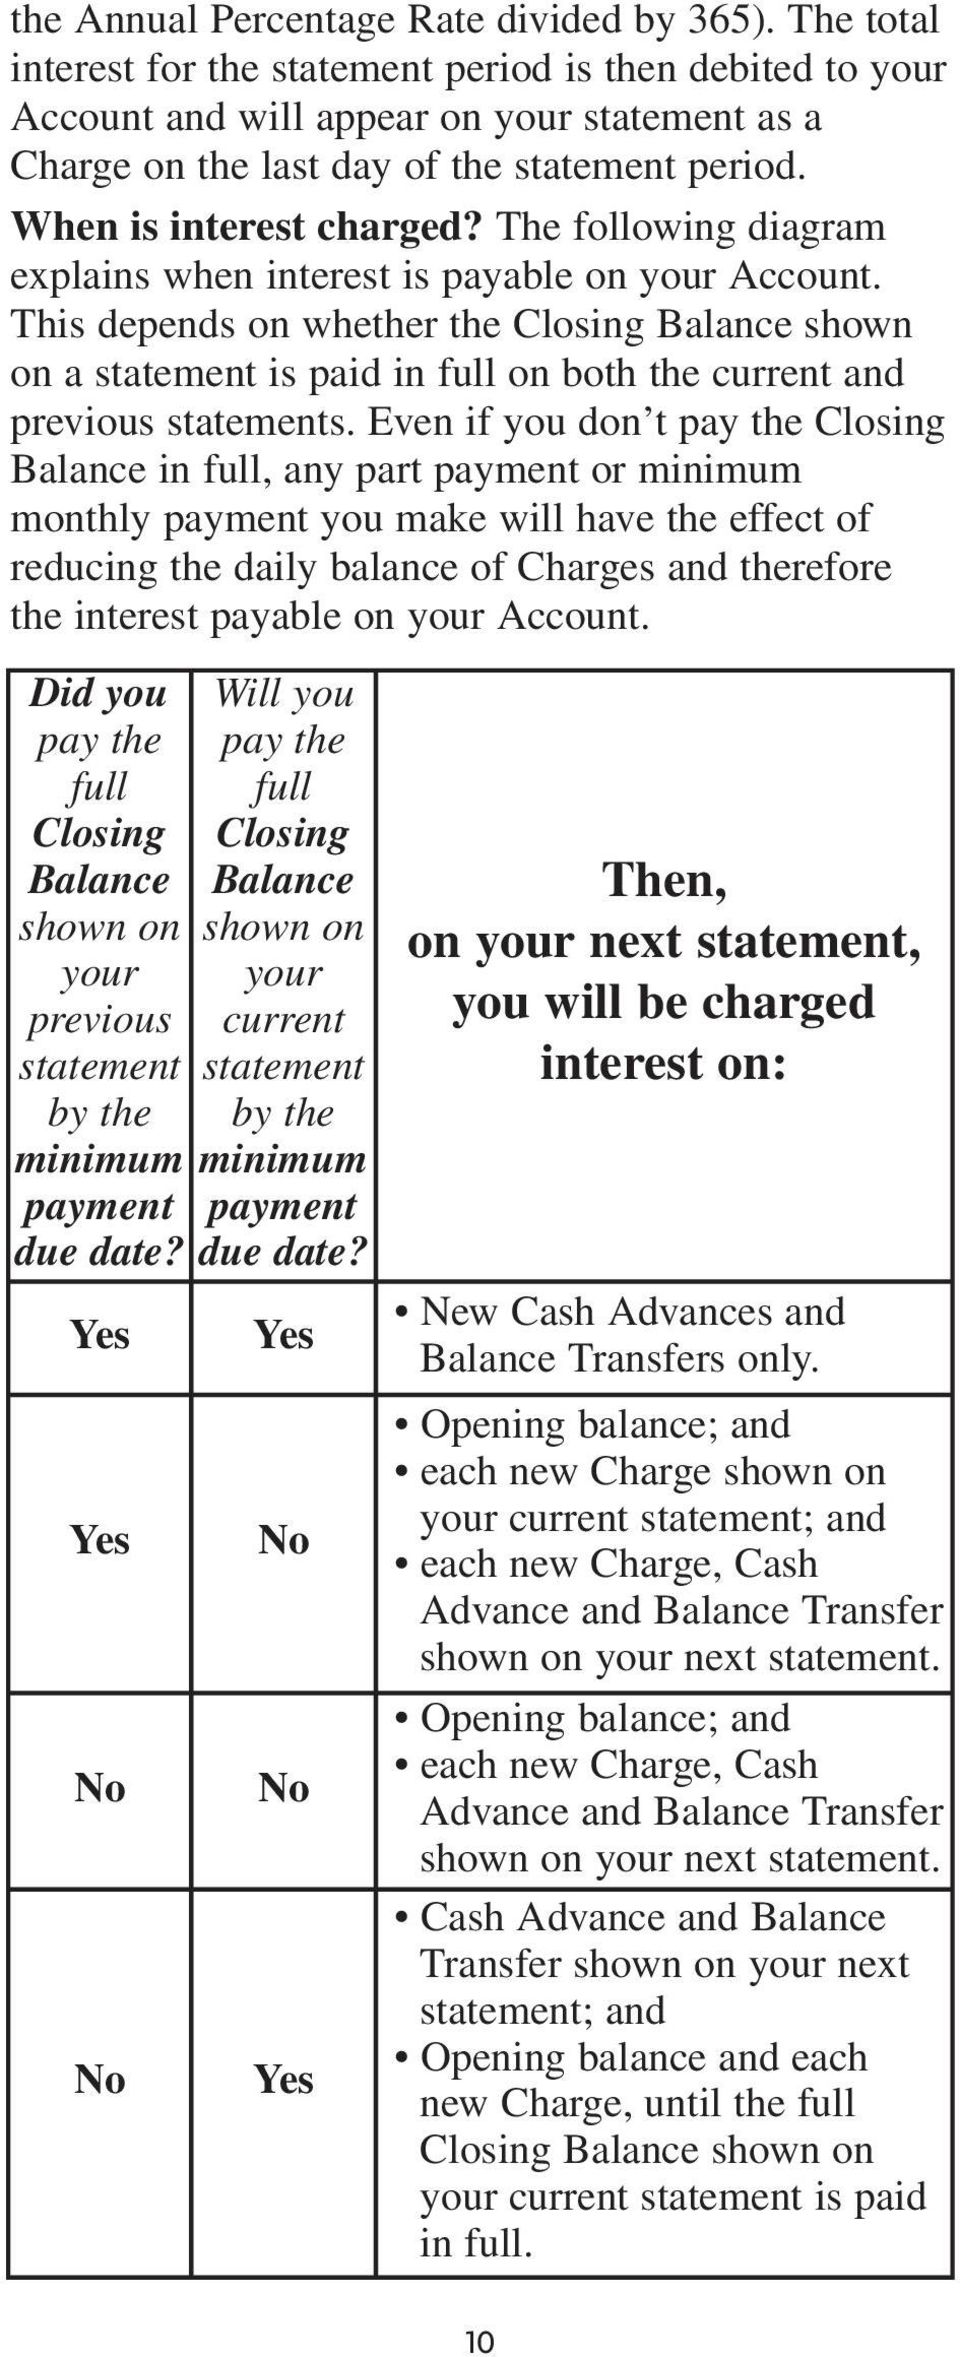 The following diagram explains when interest is payable on your Account. This depends on whether the Closing Balance shown on a statement is paid in full on both the current and previous statements.